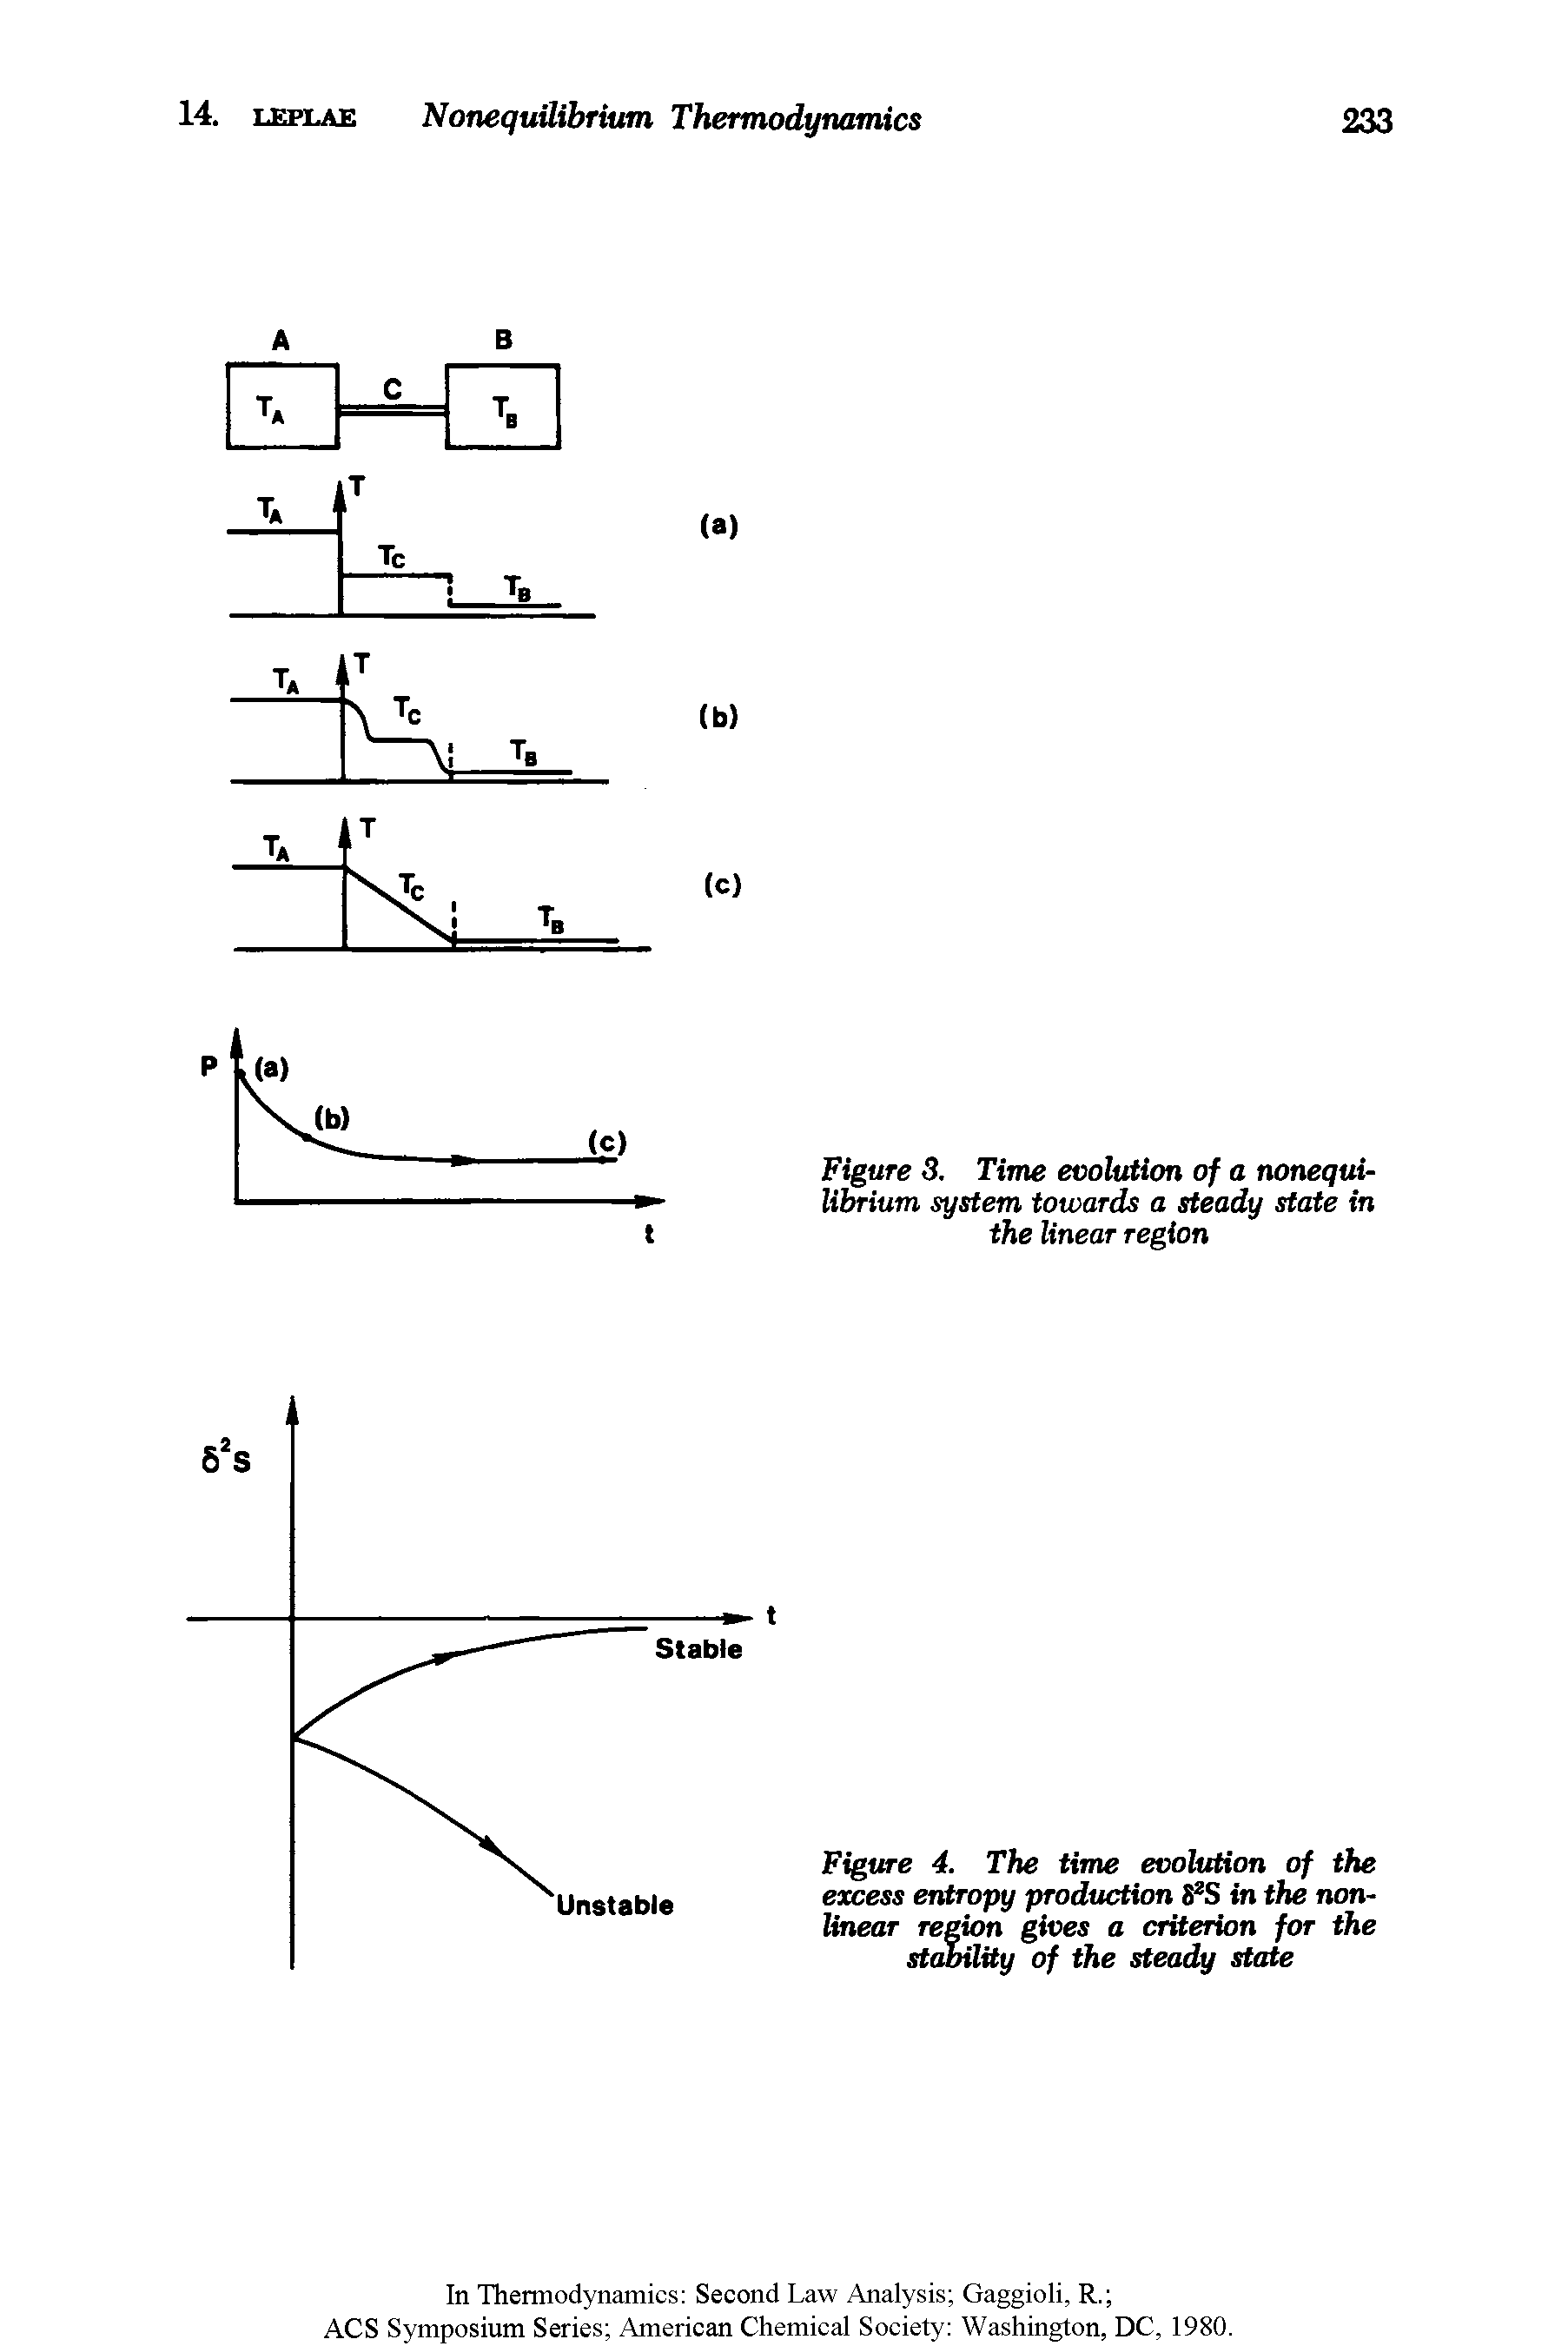 Figure 4. The time evolution of the excess entropy production 82S in the nonlinear region gives a criterion for the stability of the steady state...